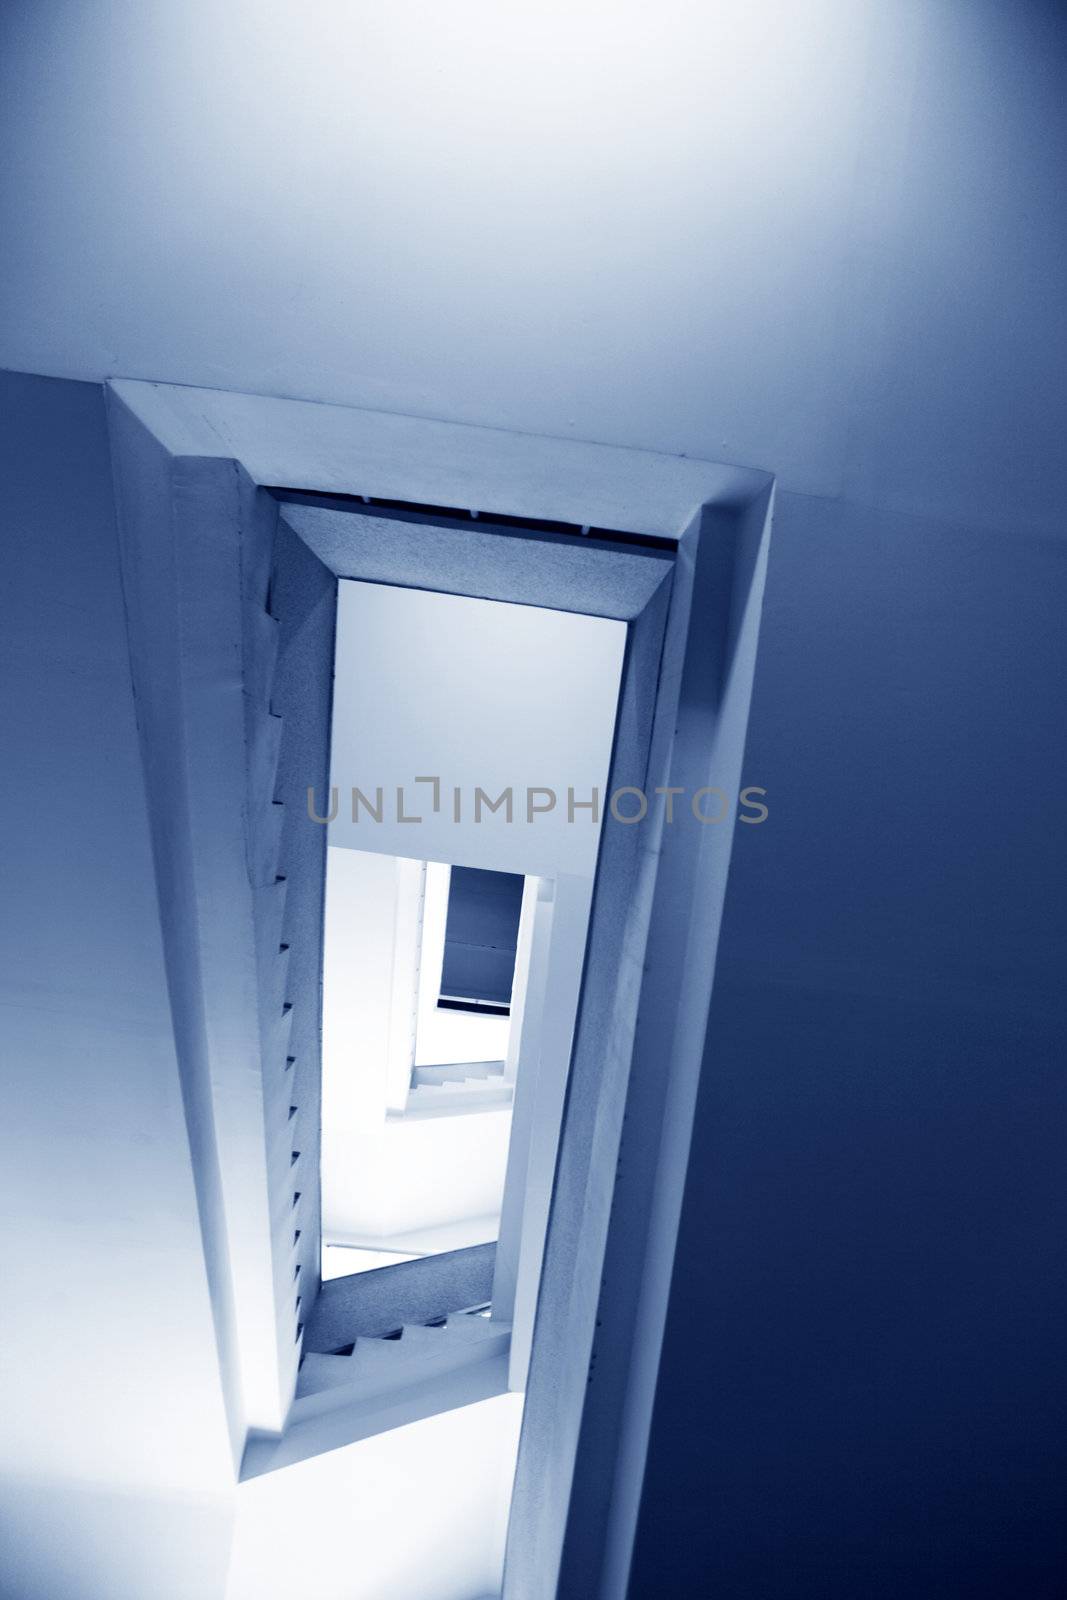 ladder go up abstract background